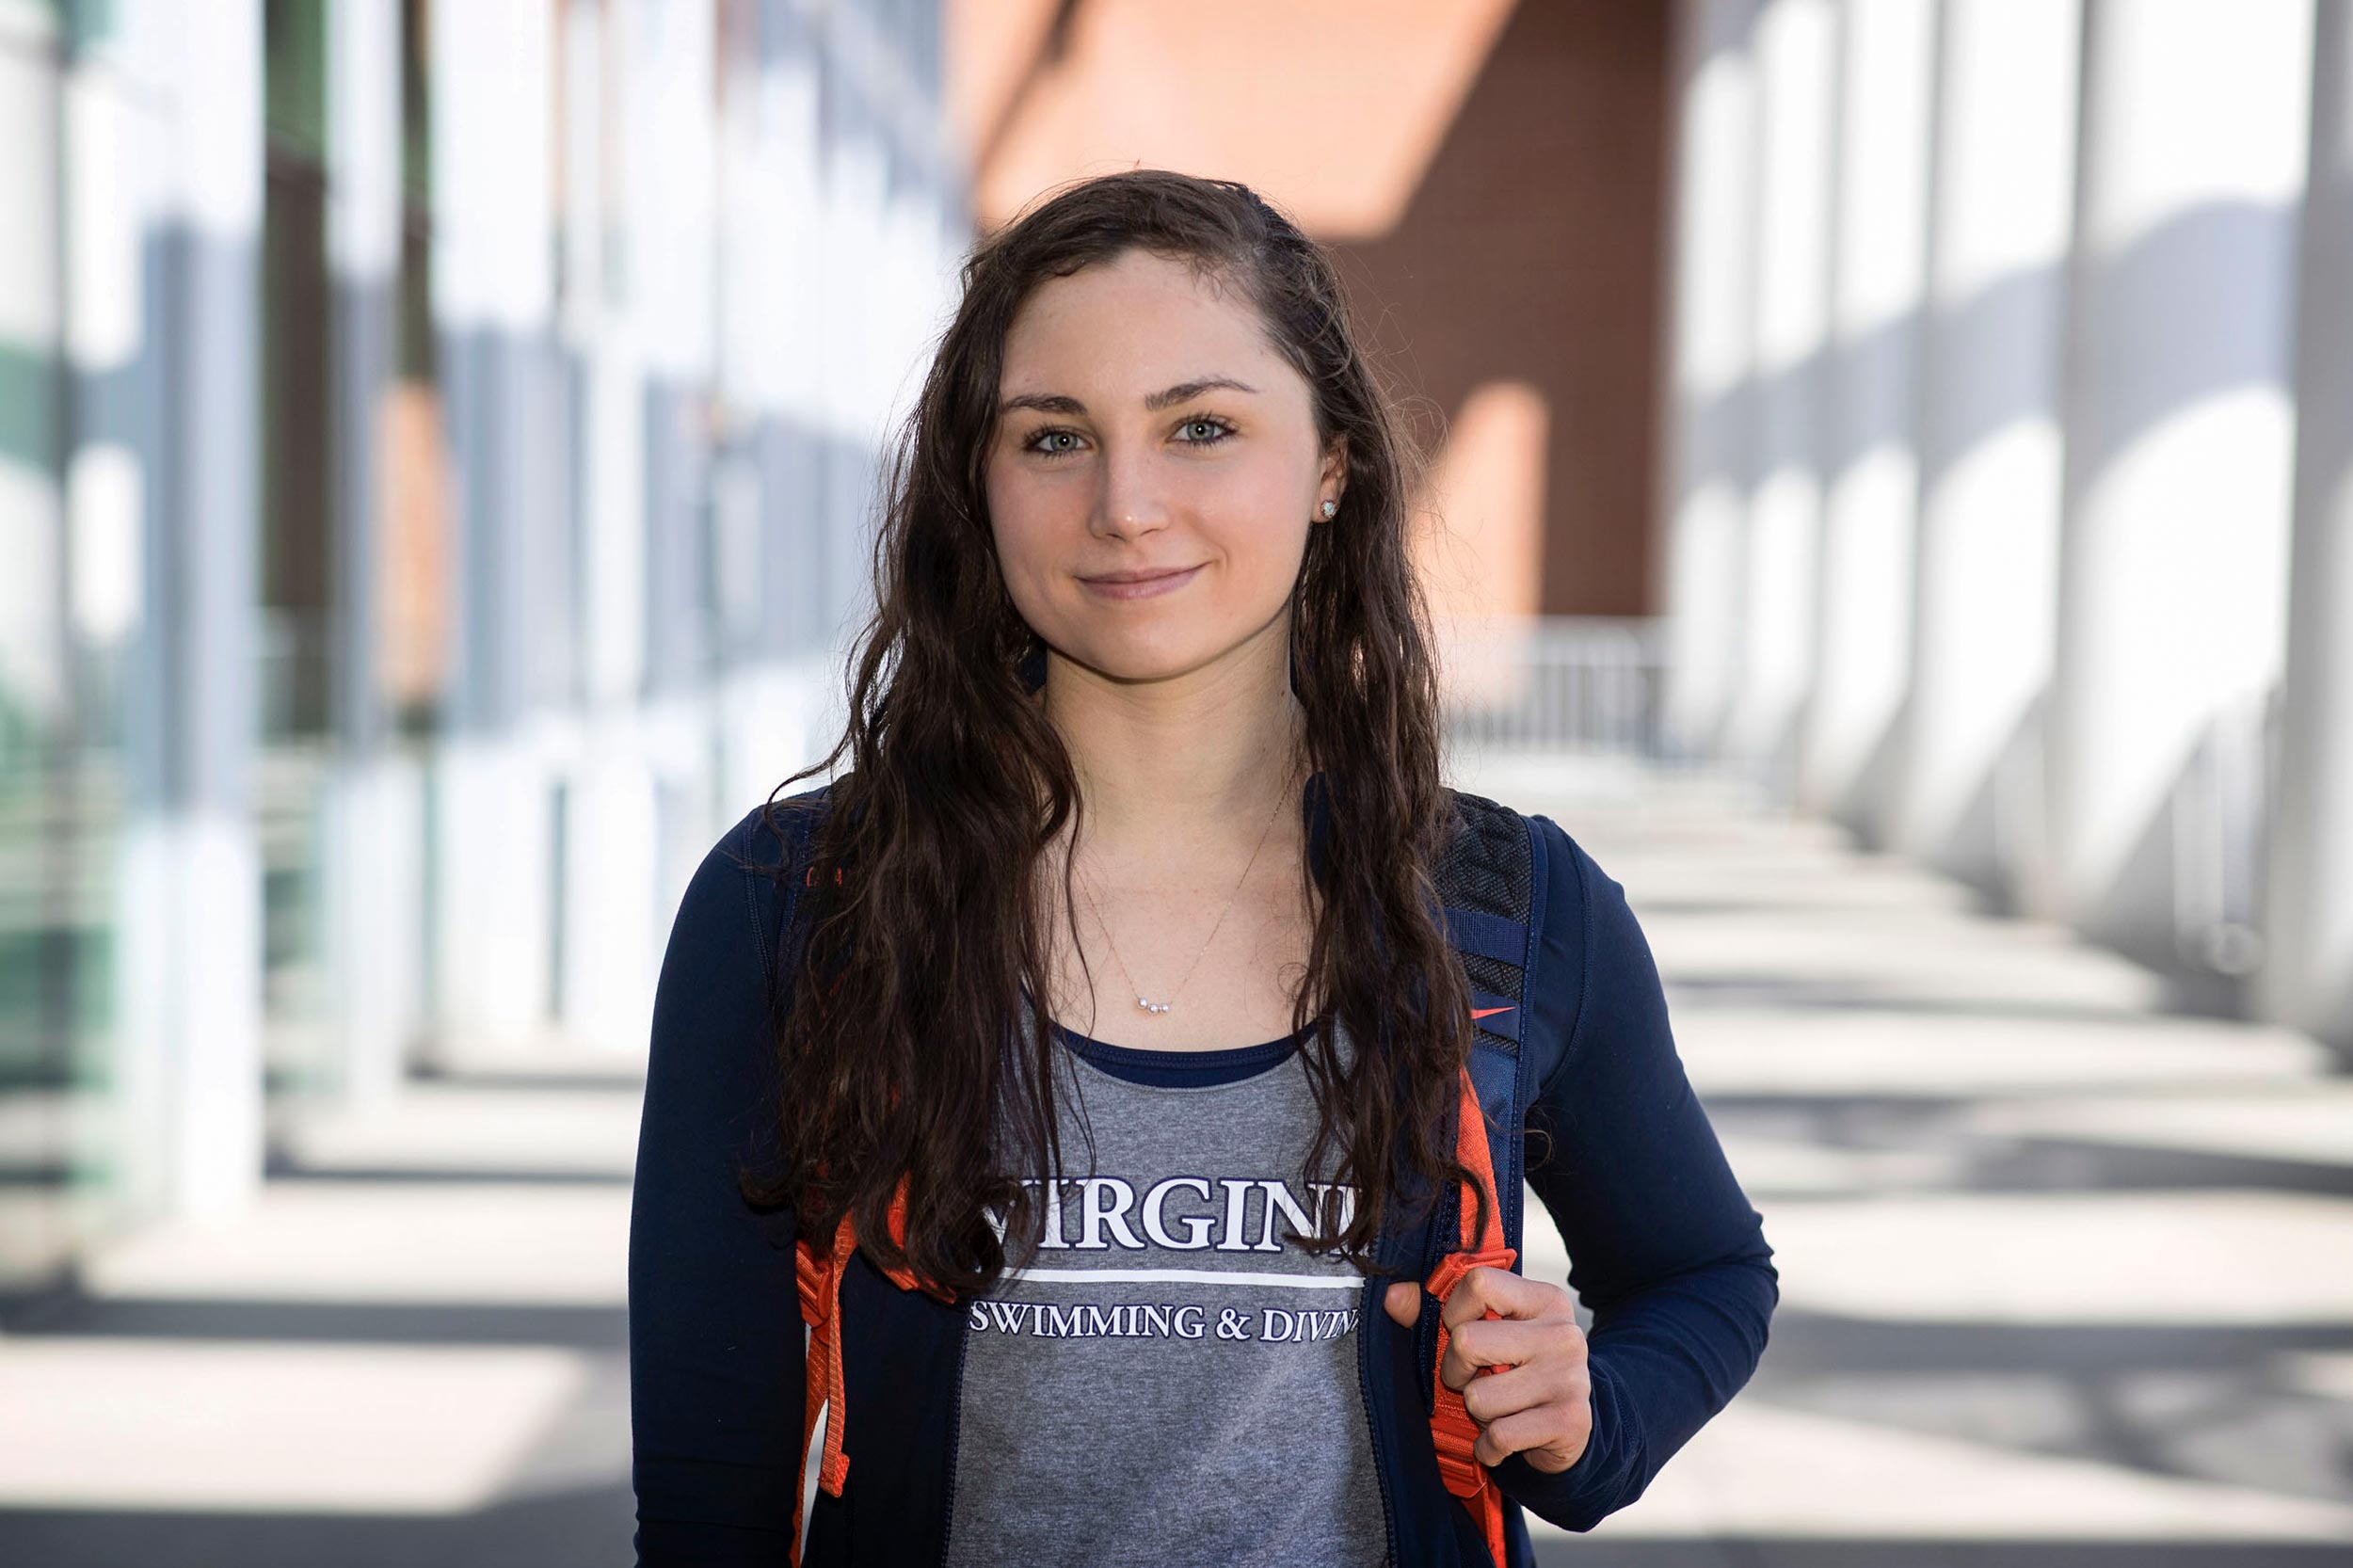 Doctor in the House: A Thirst for Helping Others Drives UVA Swimmer